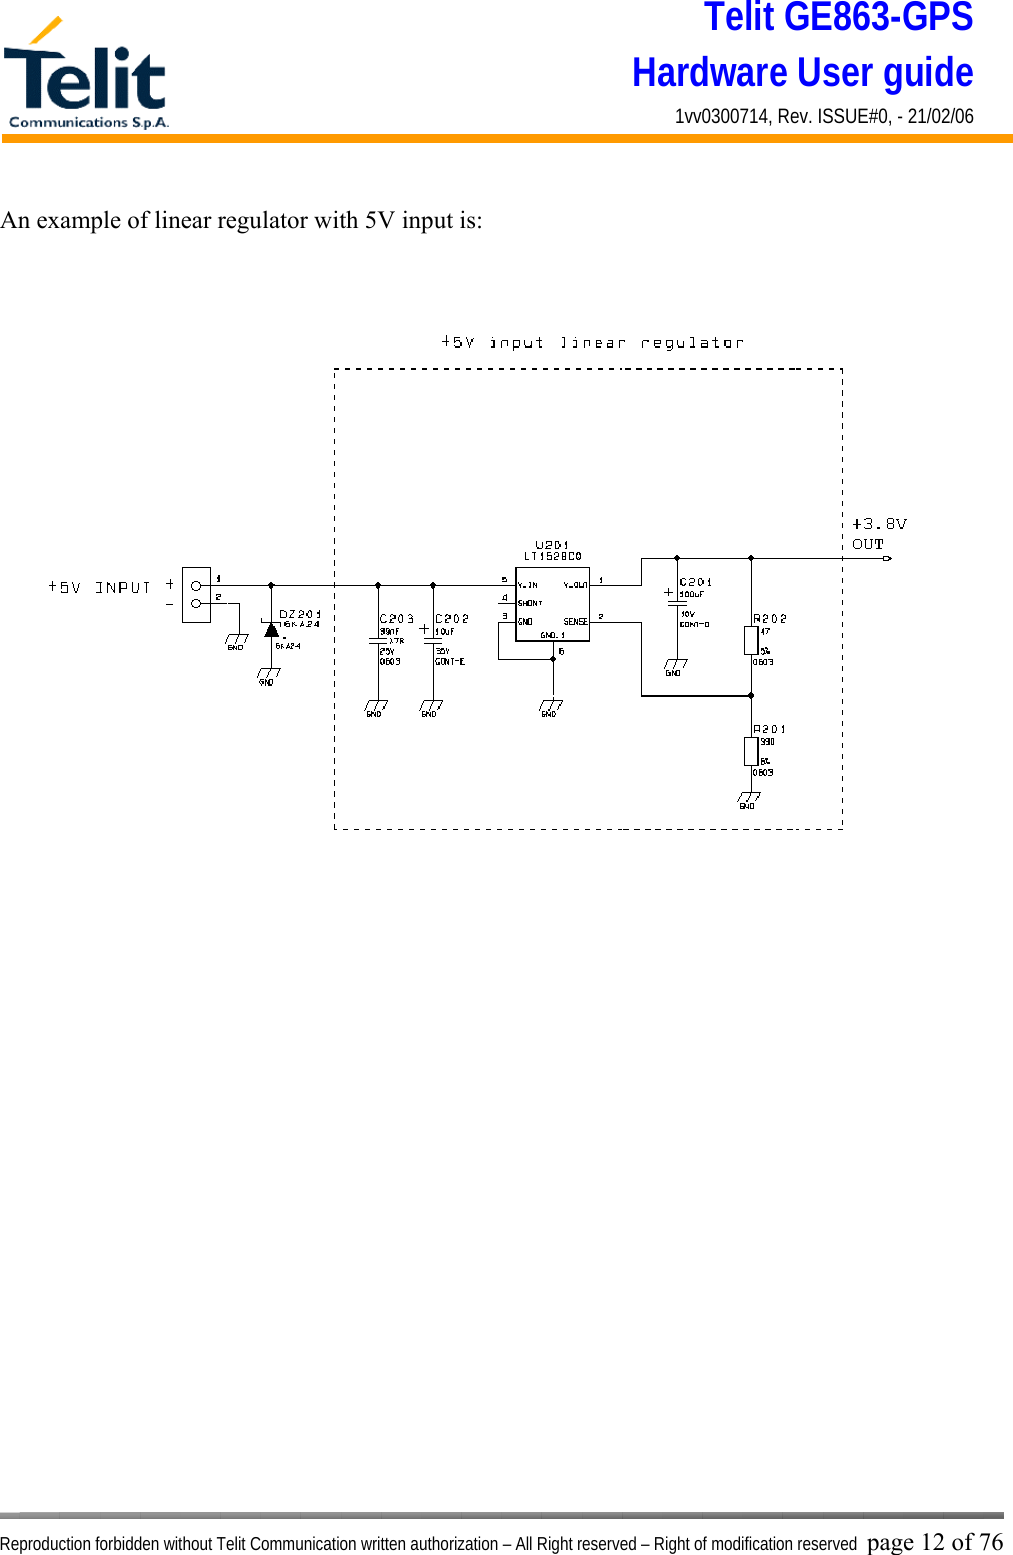 Telit GE863-GPS Hardware User guide 1vv0300714, Rev. ISSUE#0, - 21/02/06    Reproduction forbidden without Telit Communication written authorization – All Right reserved – Right of modification reserved page 12 of 76 An example of linear regulator with 5V input is:                    